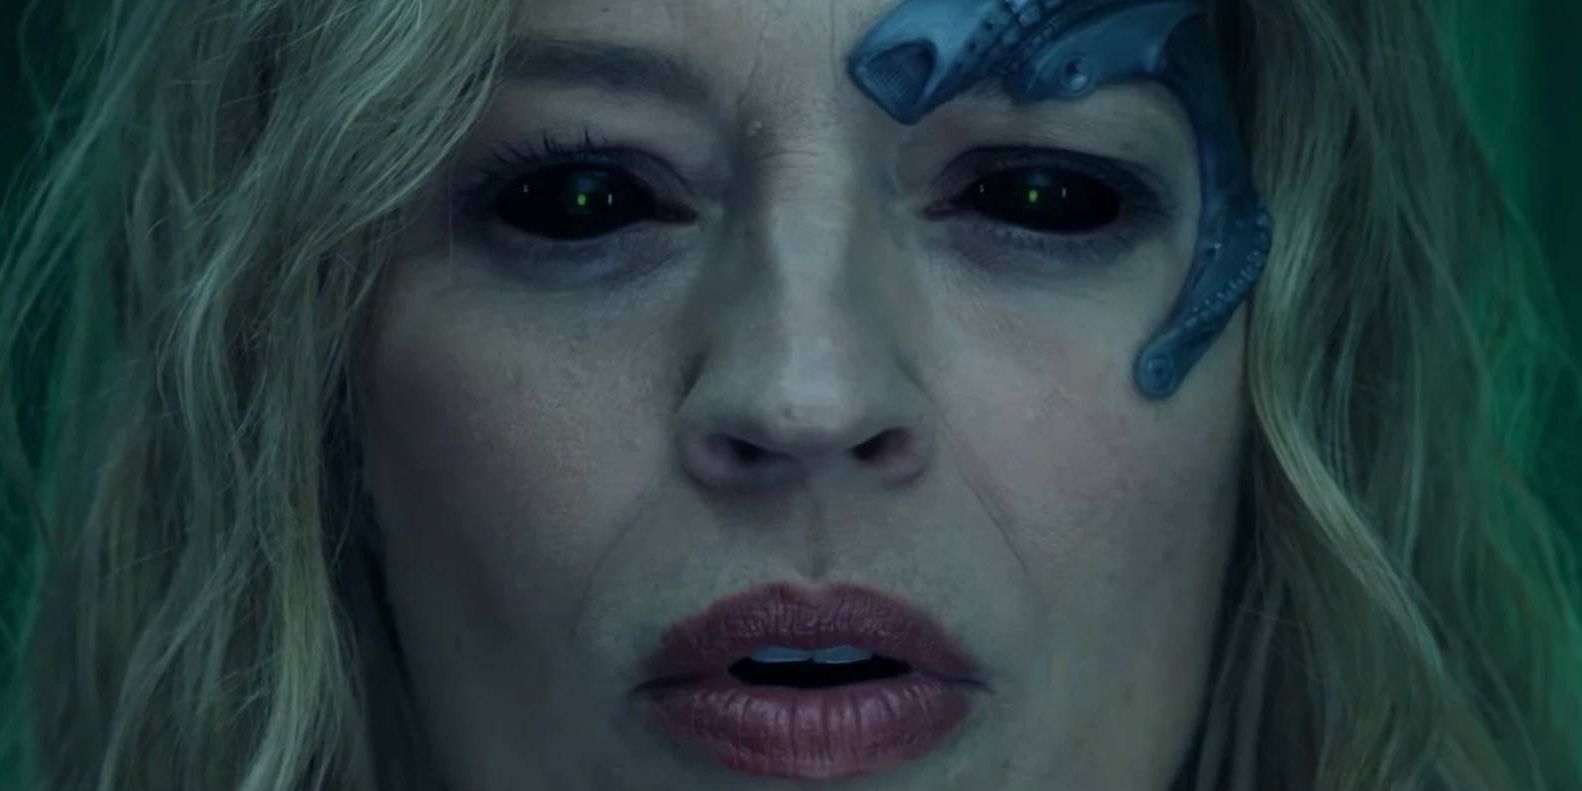 Seven of Nine Becoming the Borg Queen in Star Trek: Picard